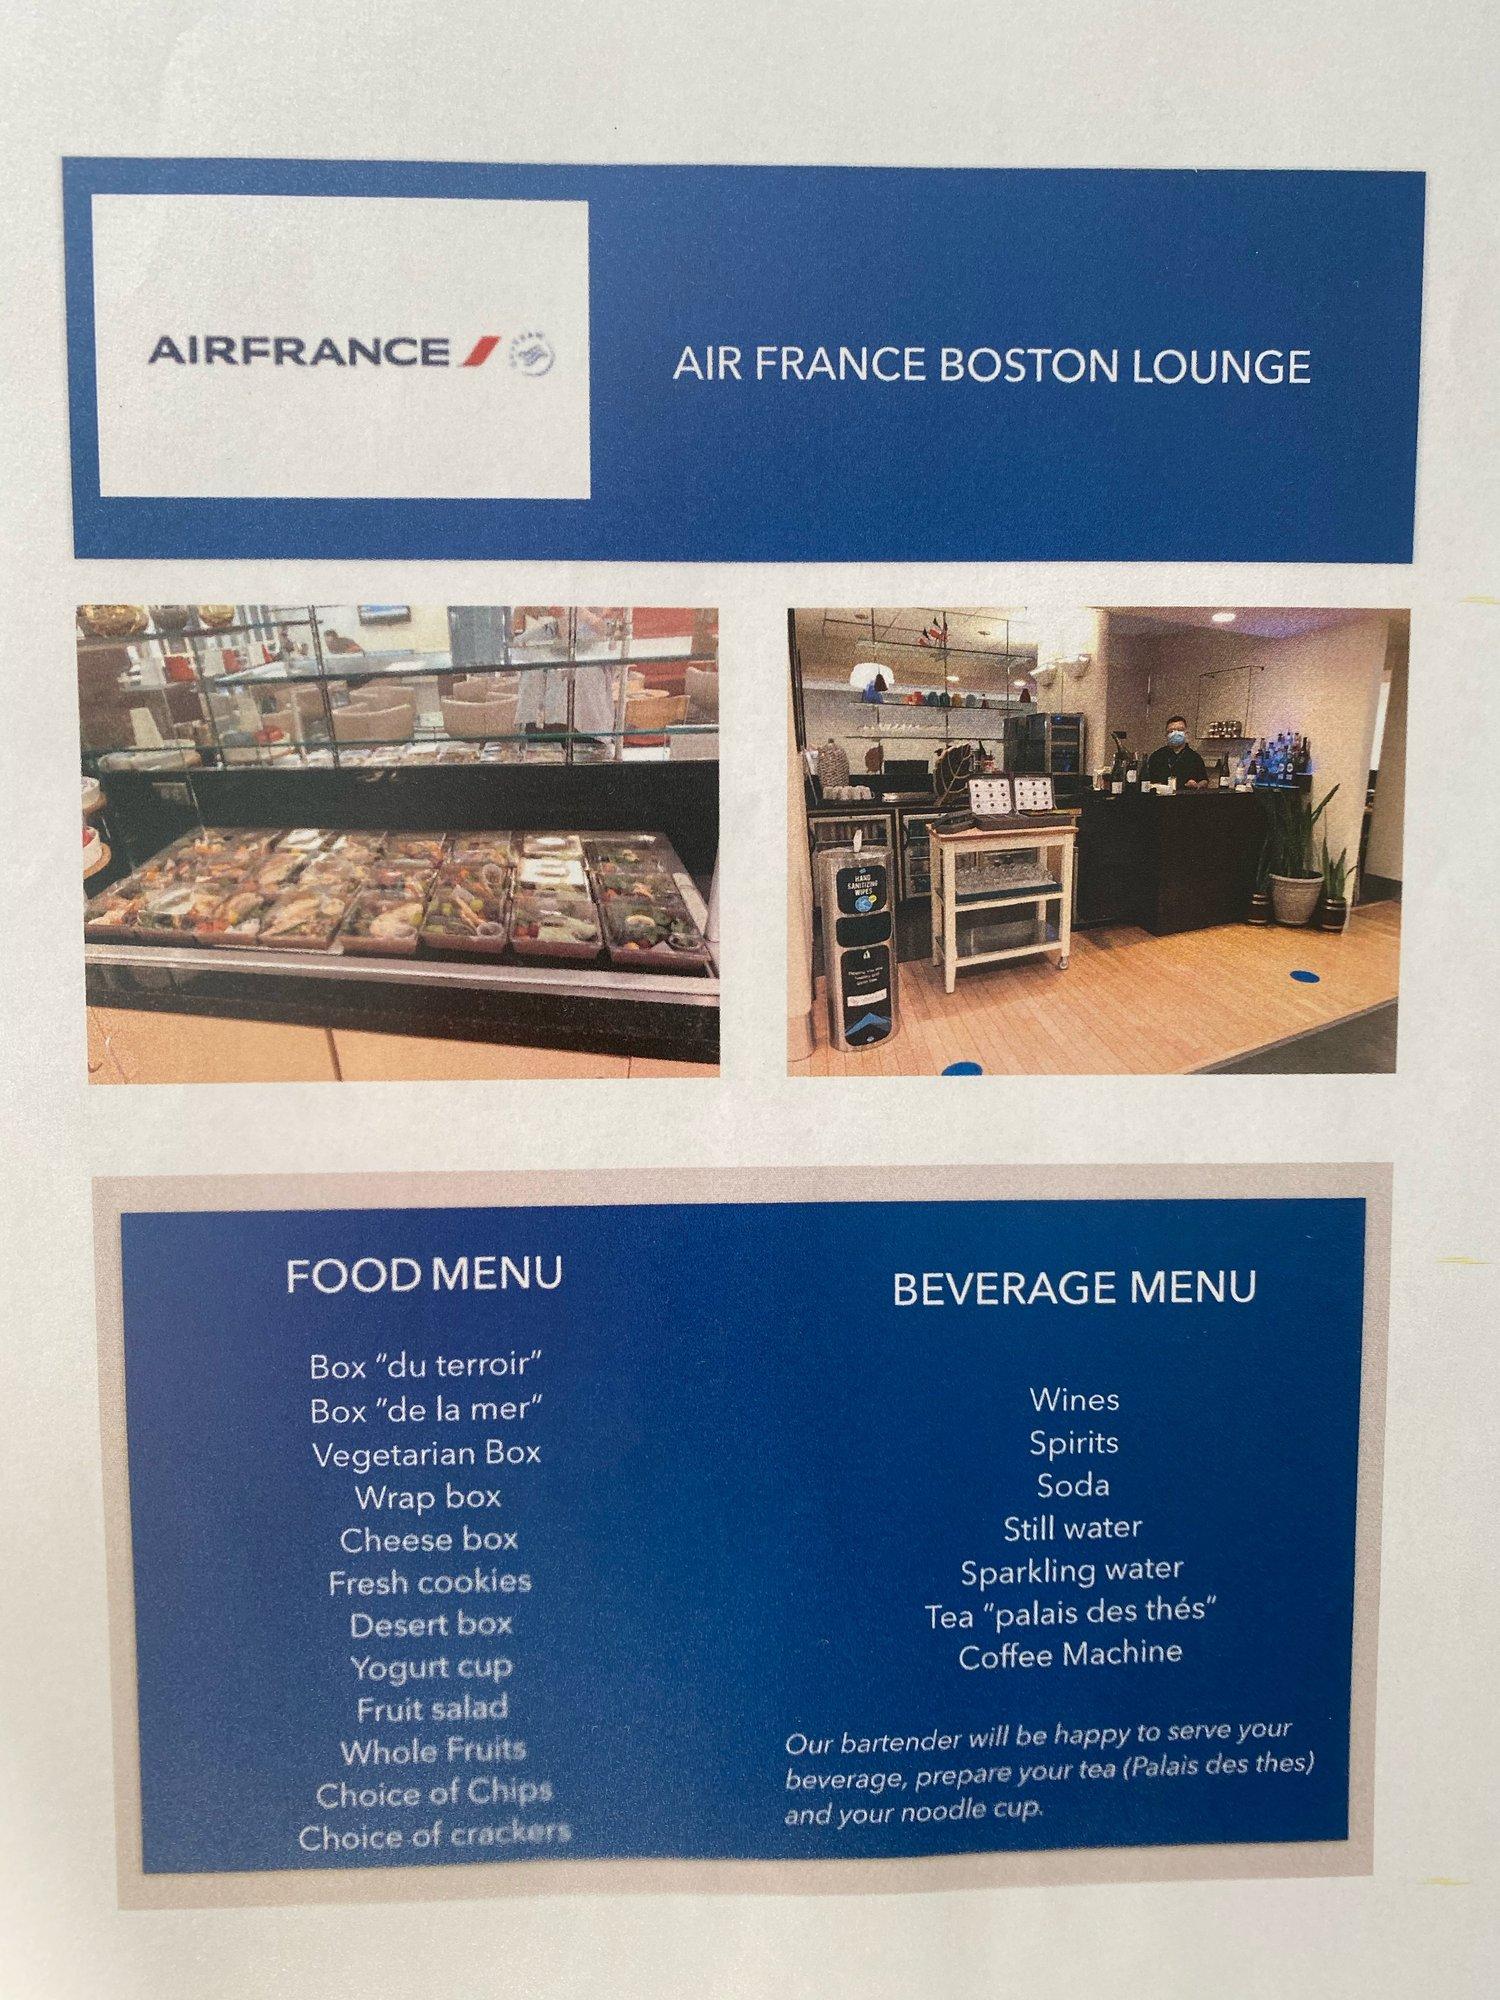 Air France Lounge image 24 of 26